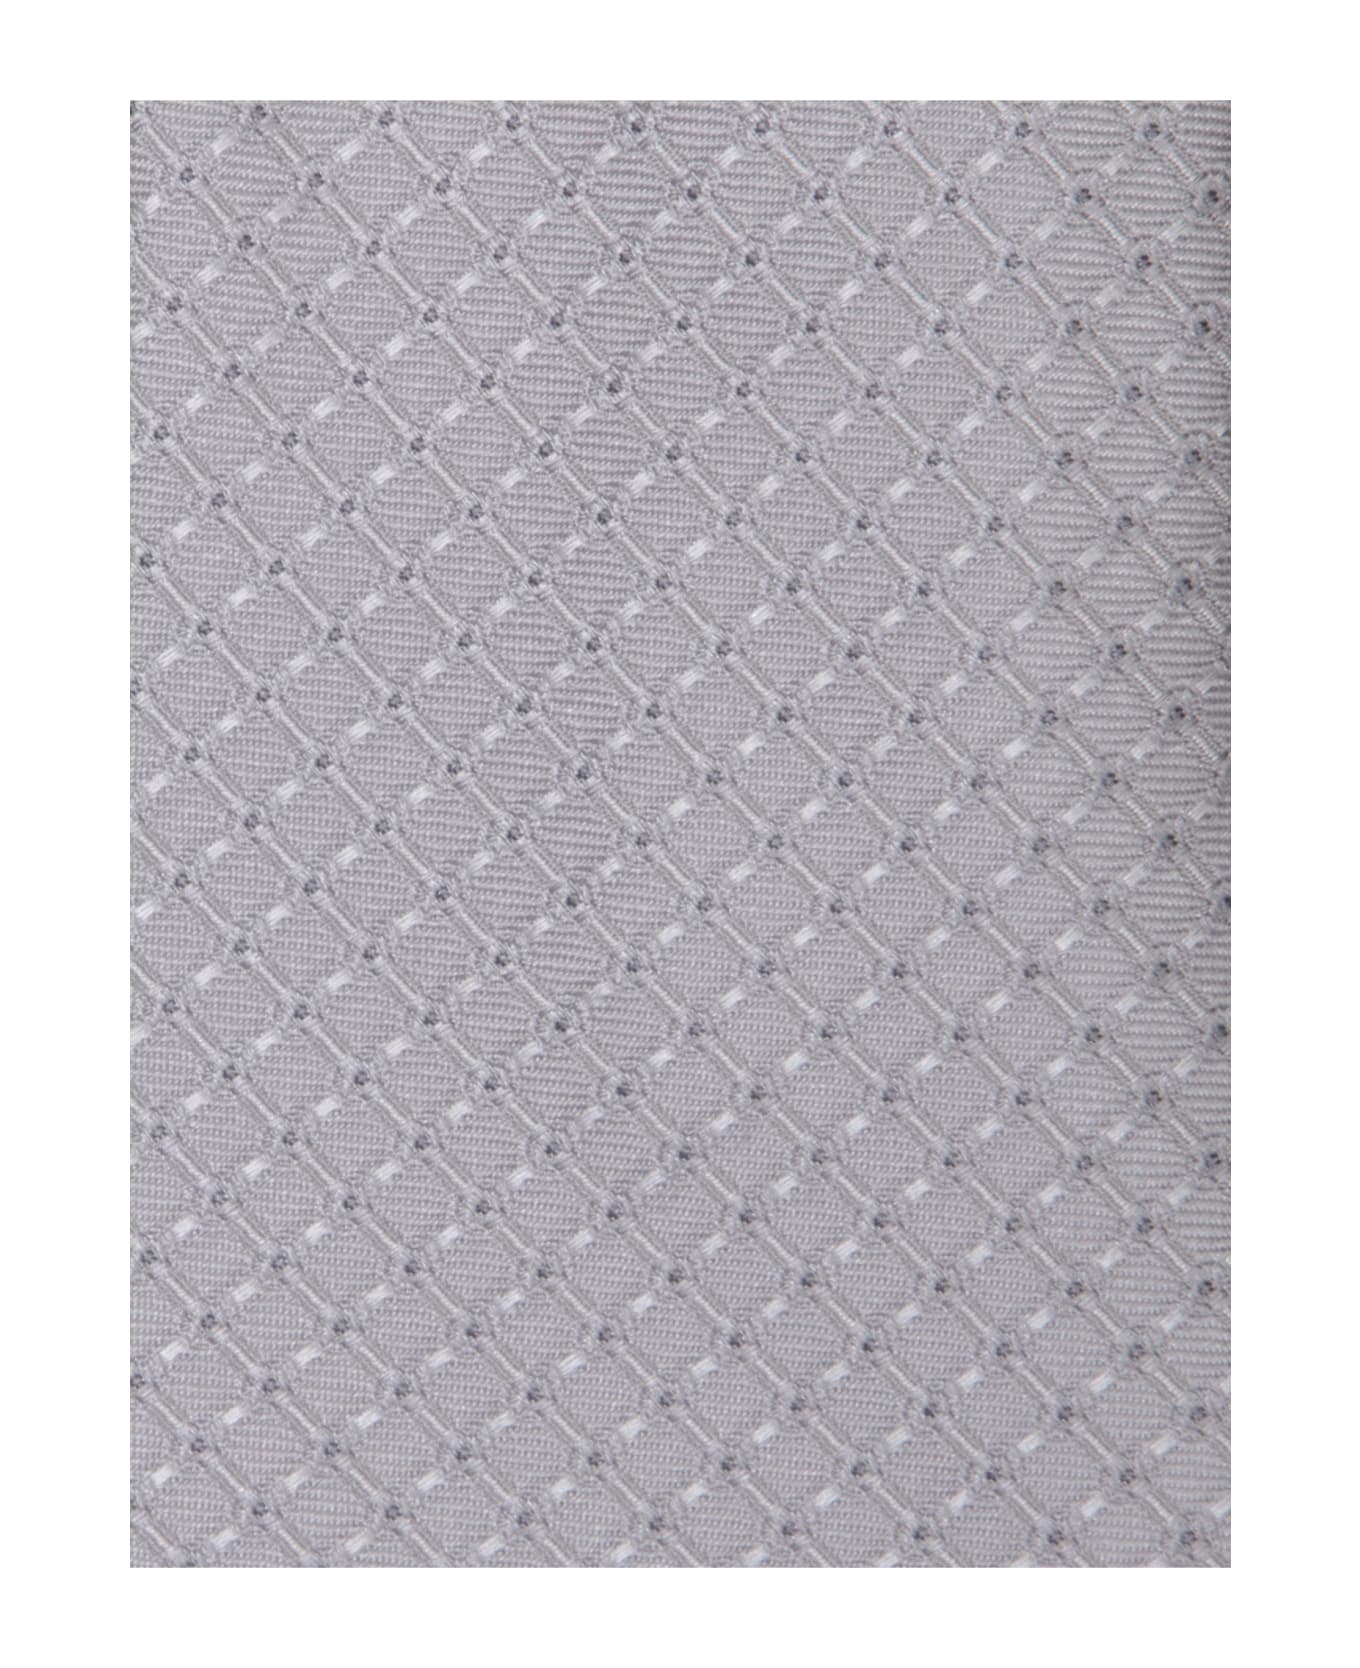 Canali Micropattern Rhombuses Grey Tie - White